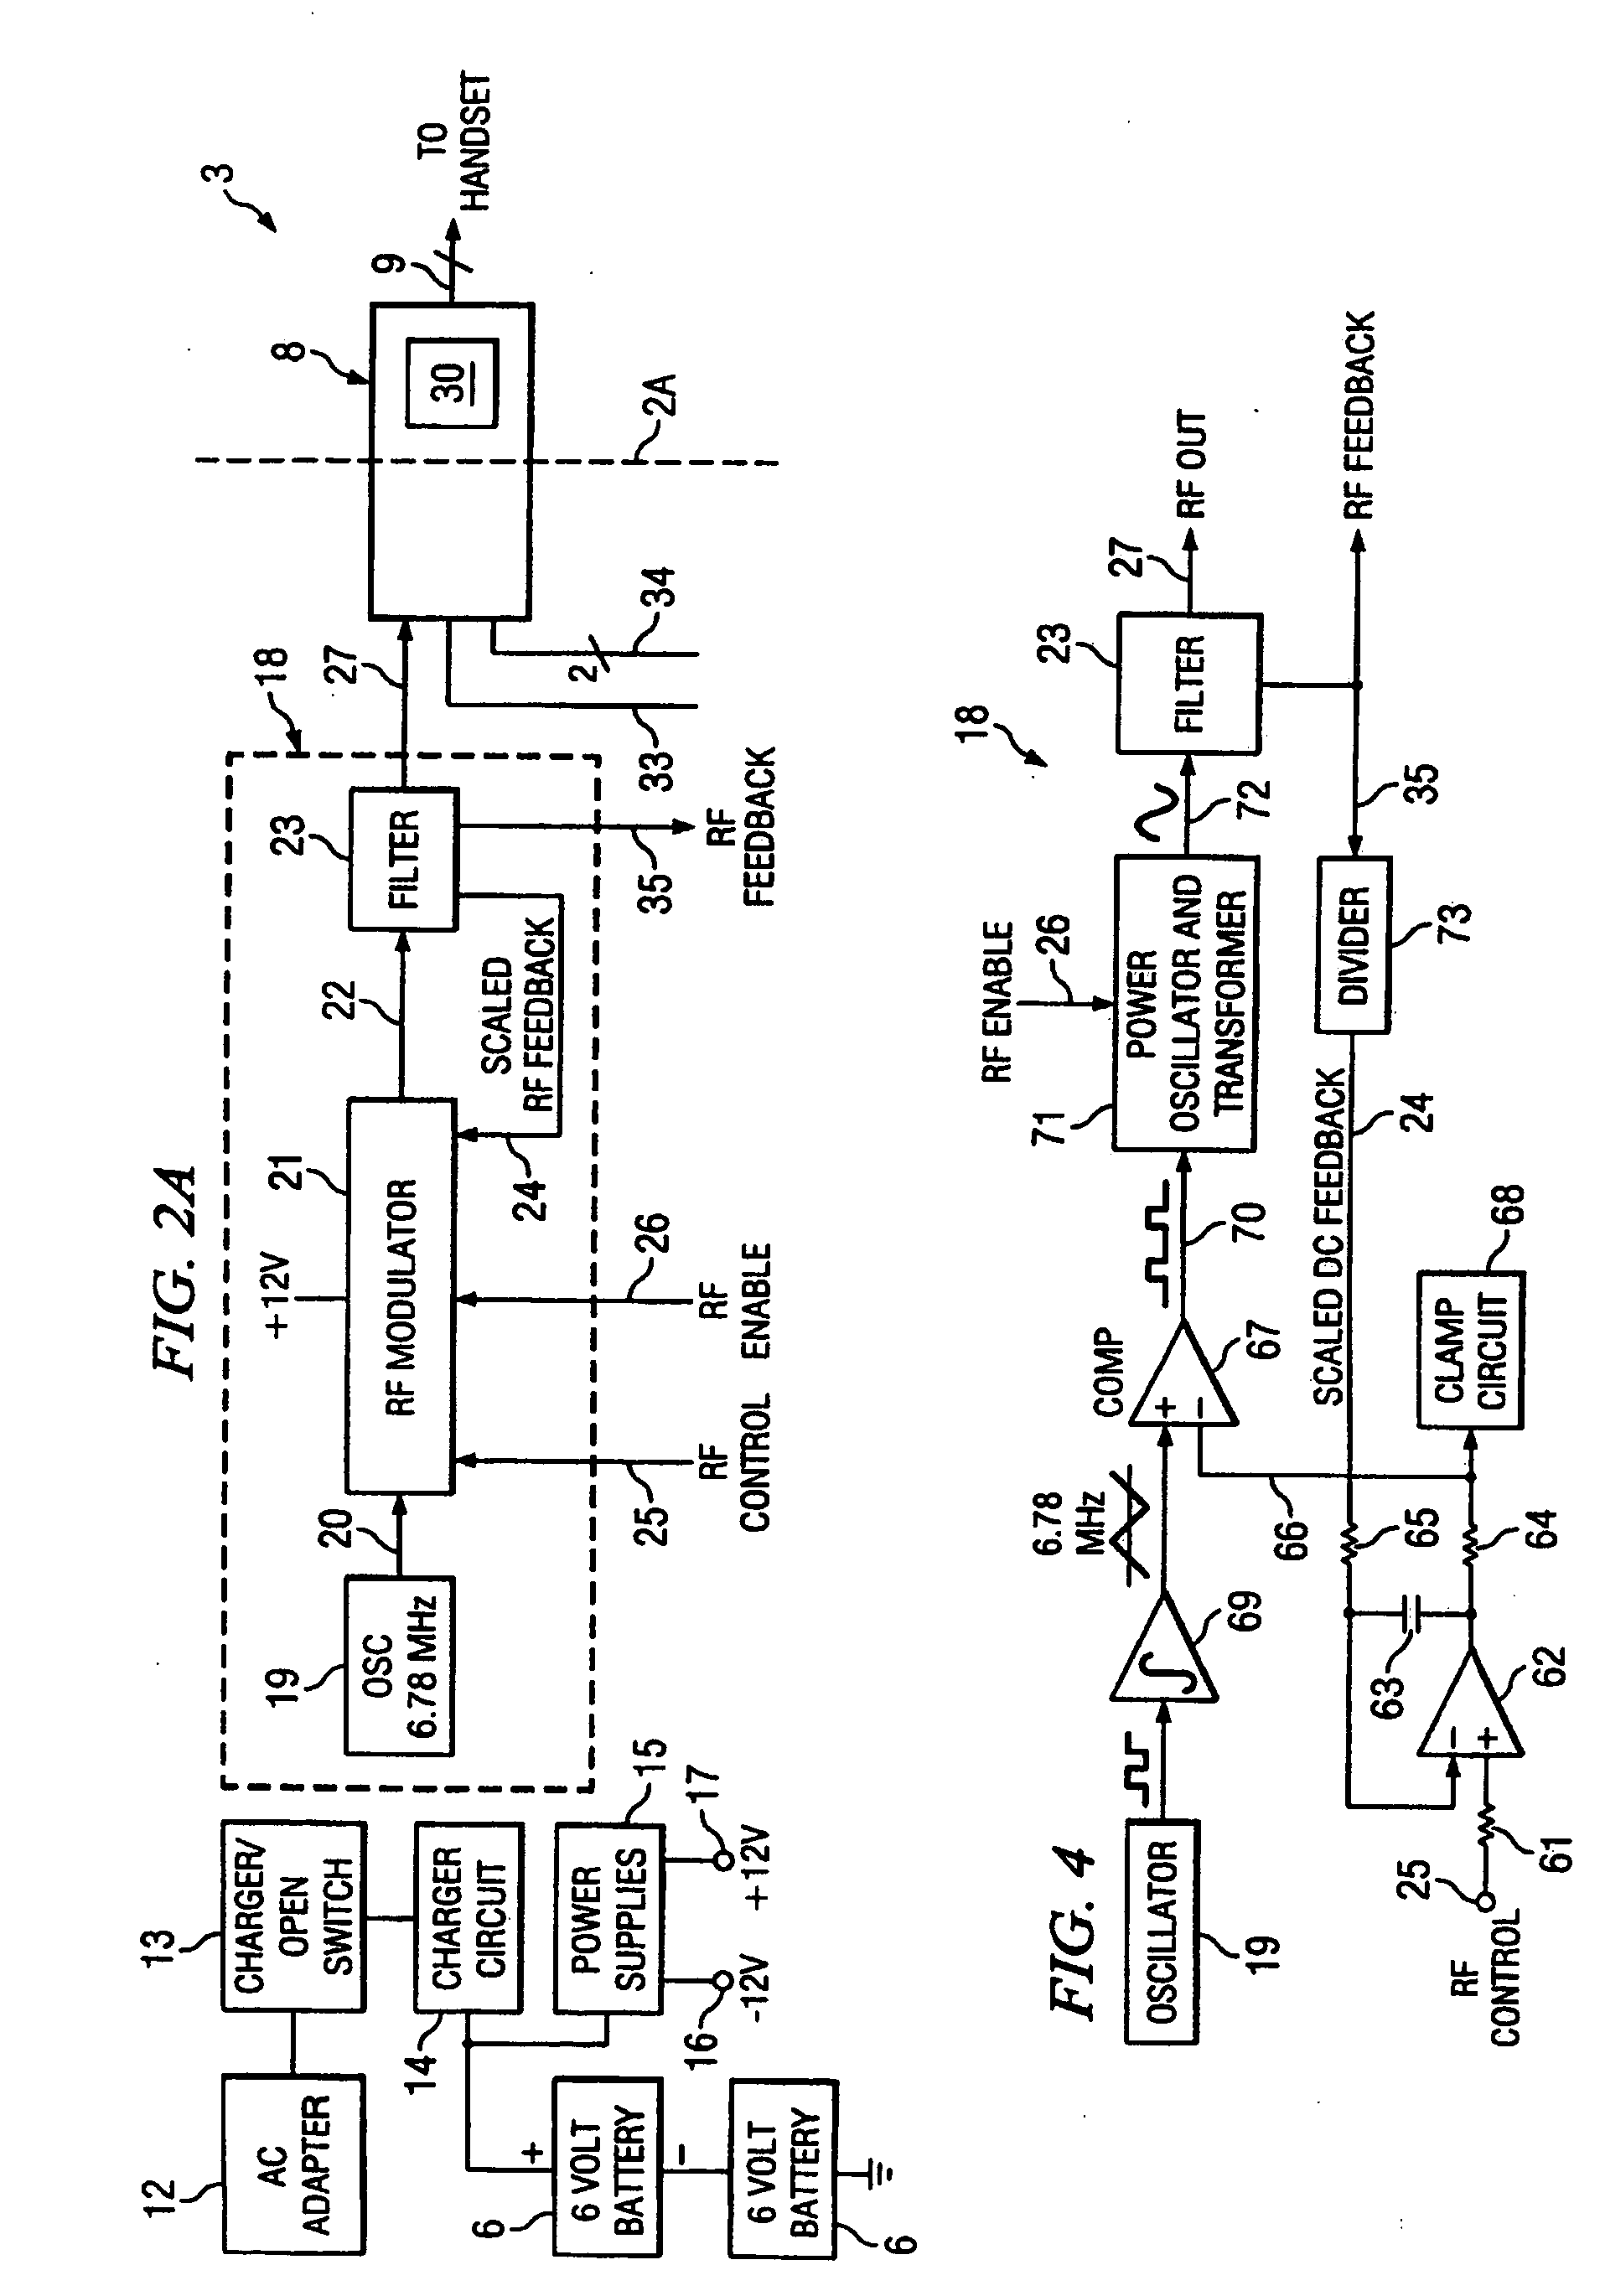 Hyperthermia treatment systems and methods